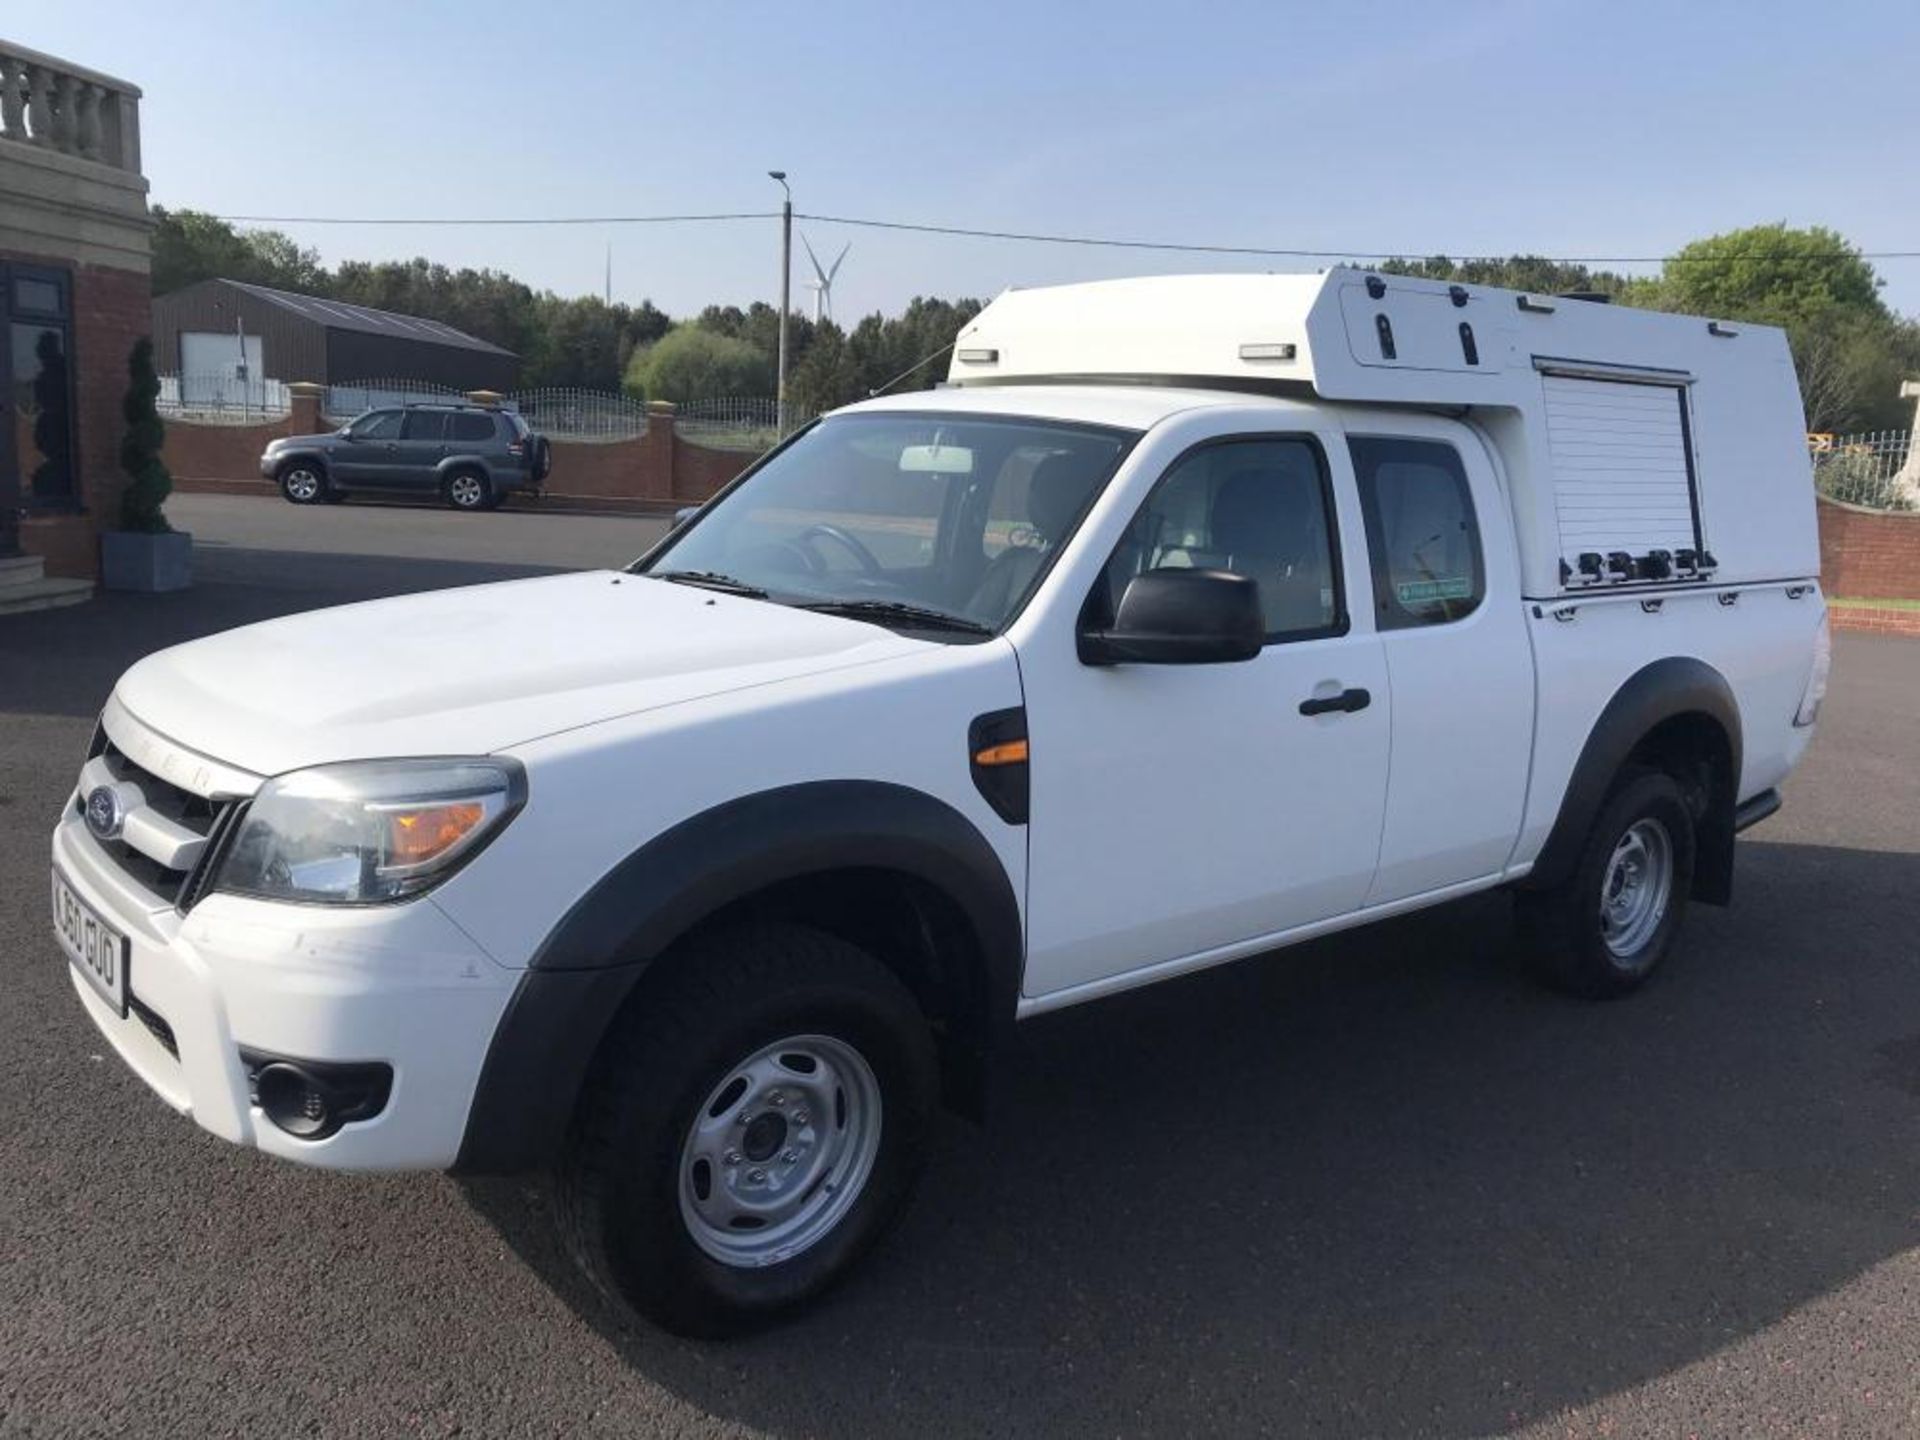 2010/60 REG FORD RANGER XL 4X4 DOUBLE CAB TDCI 2.5 DIESEL WHITE PICK-UP, SHOWING 0 FORMER KEEPERS - Image 2 of 21